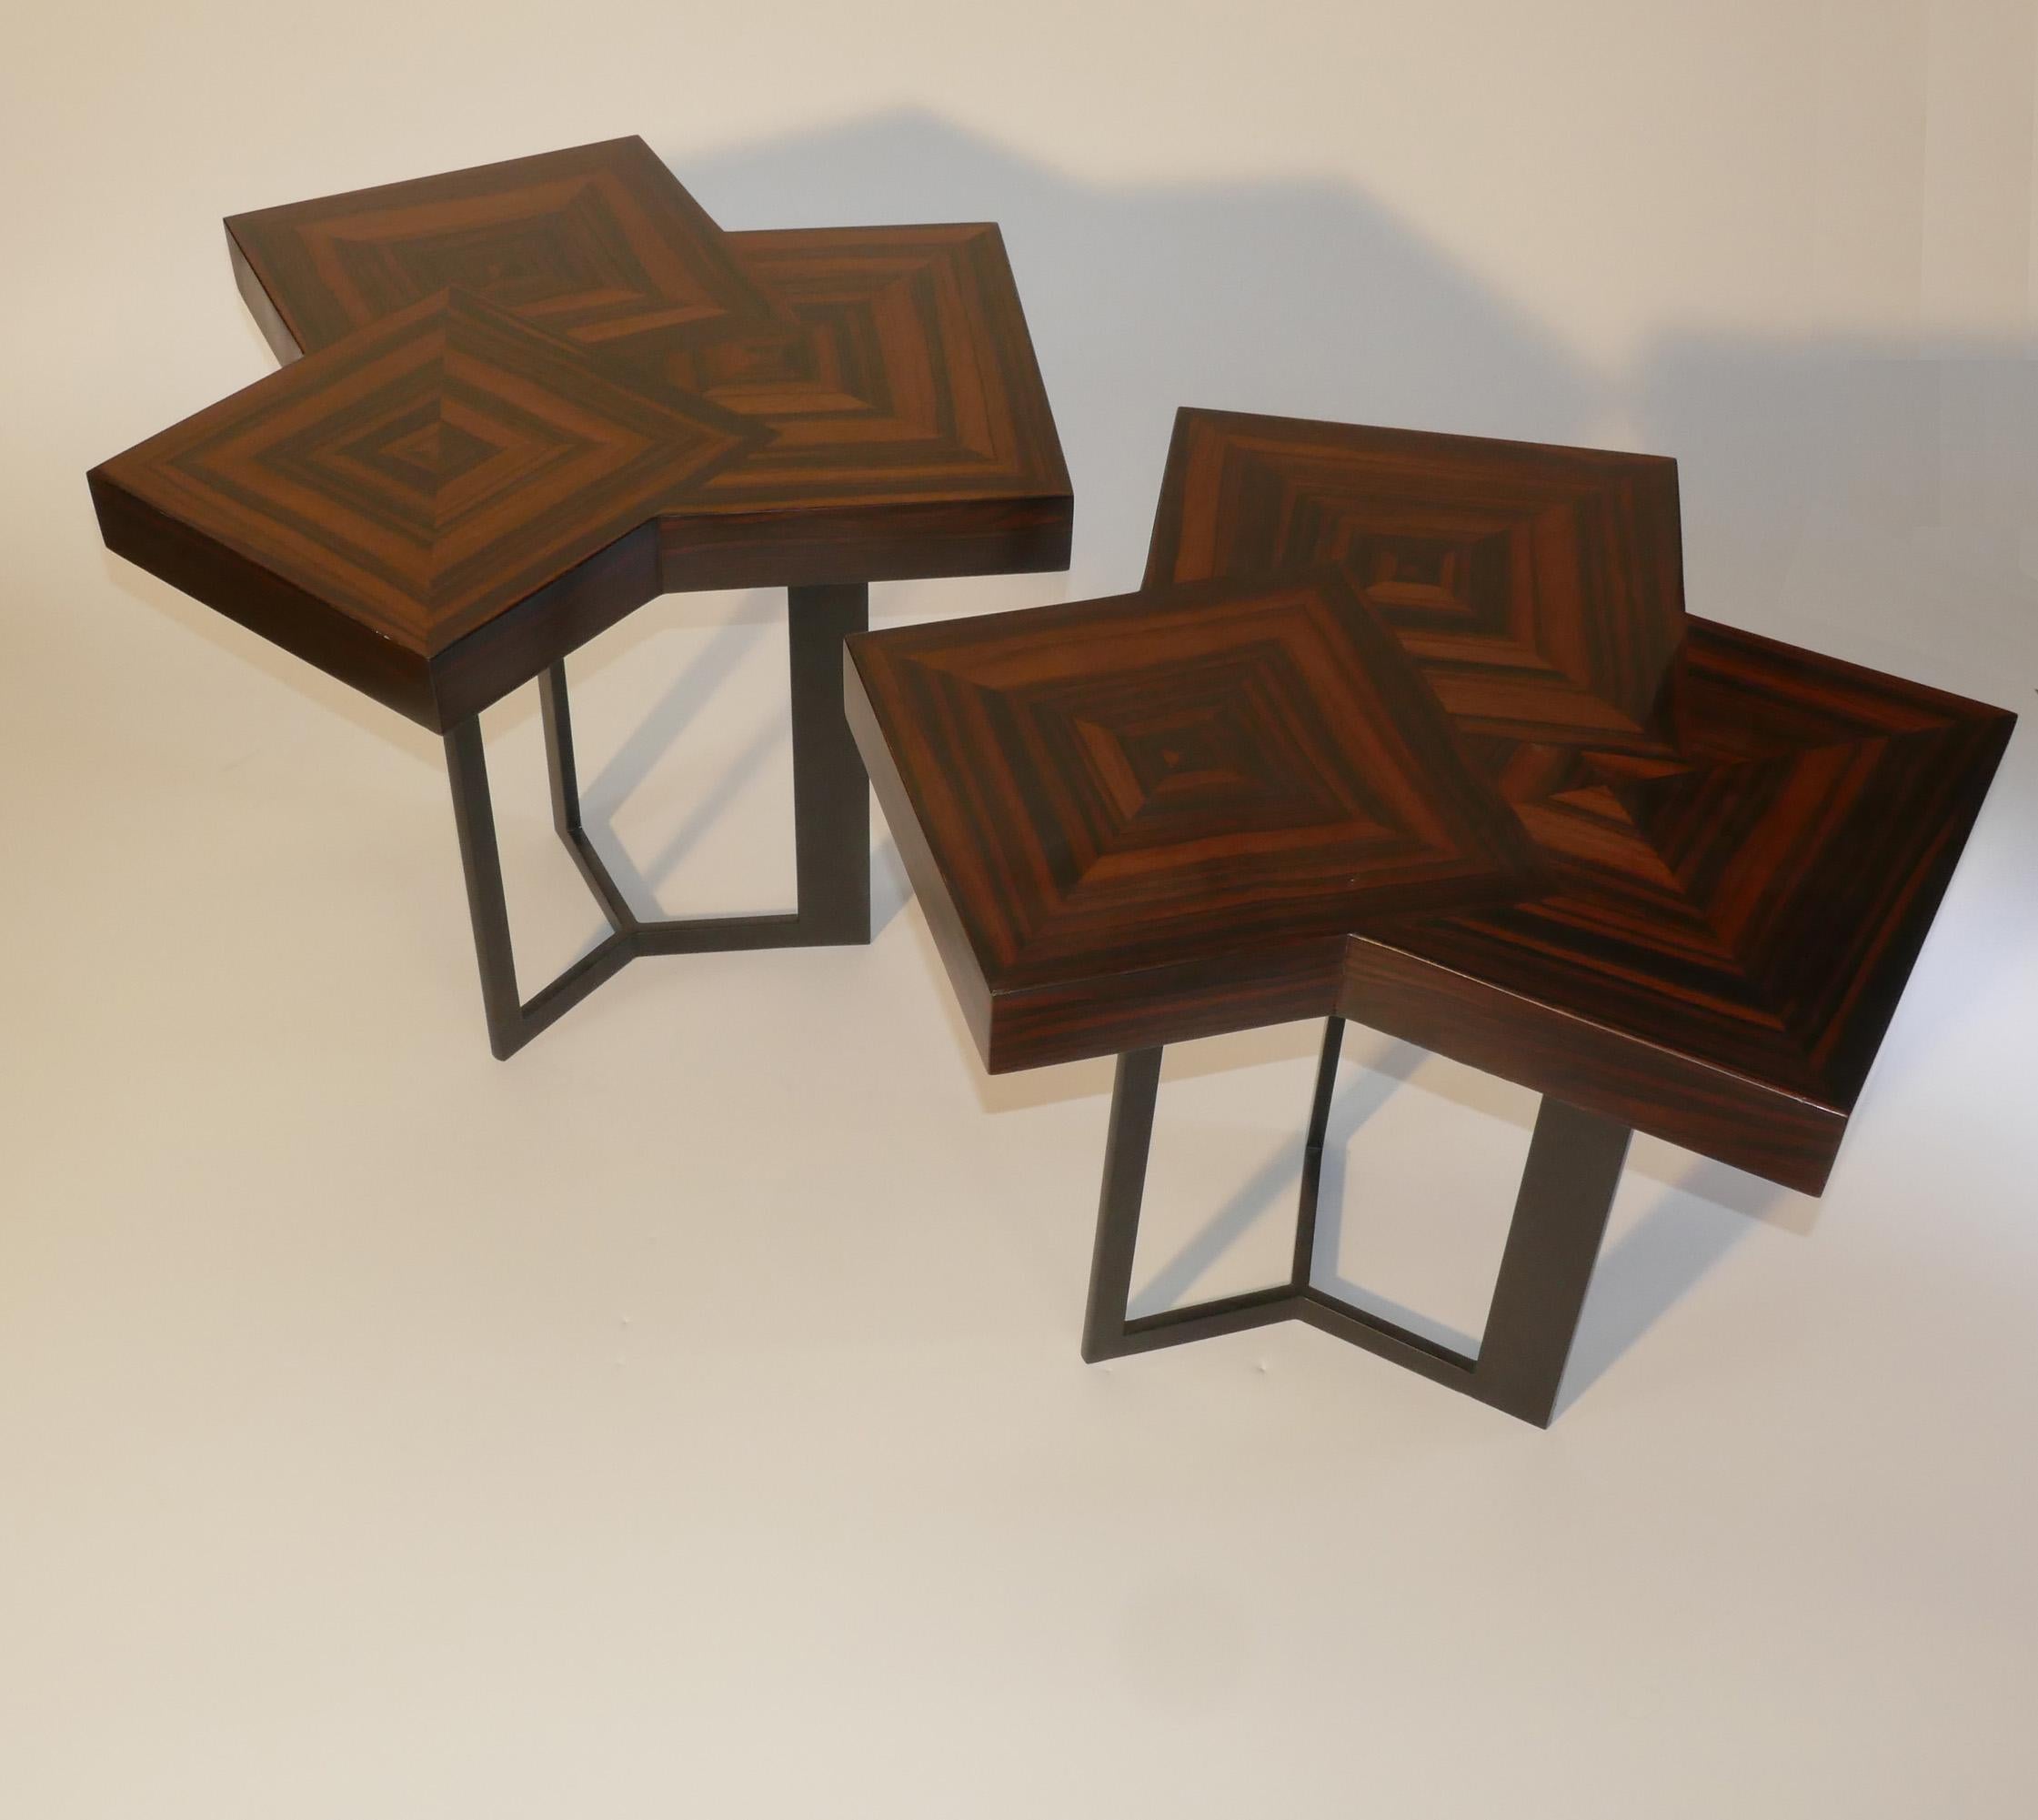 Tow coffee end table in Macassar ebony marquetry. The leg is in satin black metal.
This set can also be custom made.
Do not hesitate to ask for a shipping quote to get the best offer.